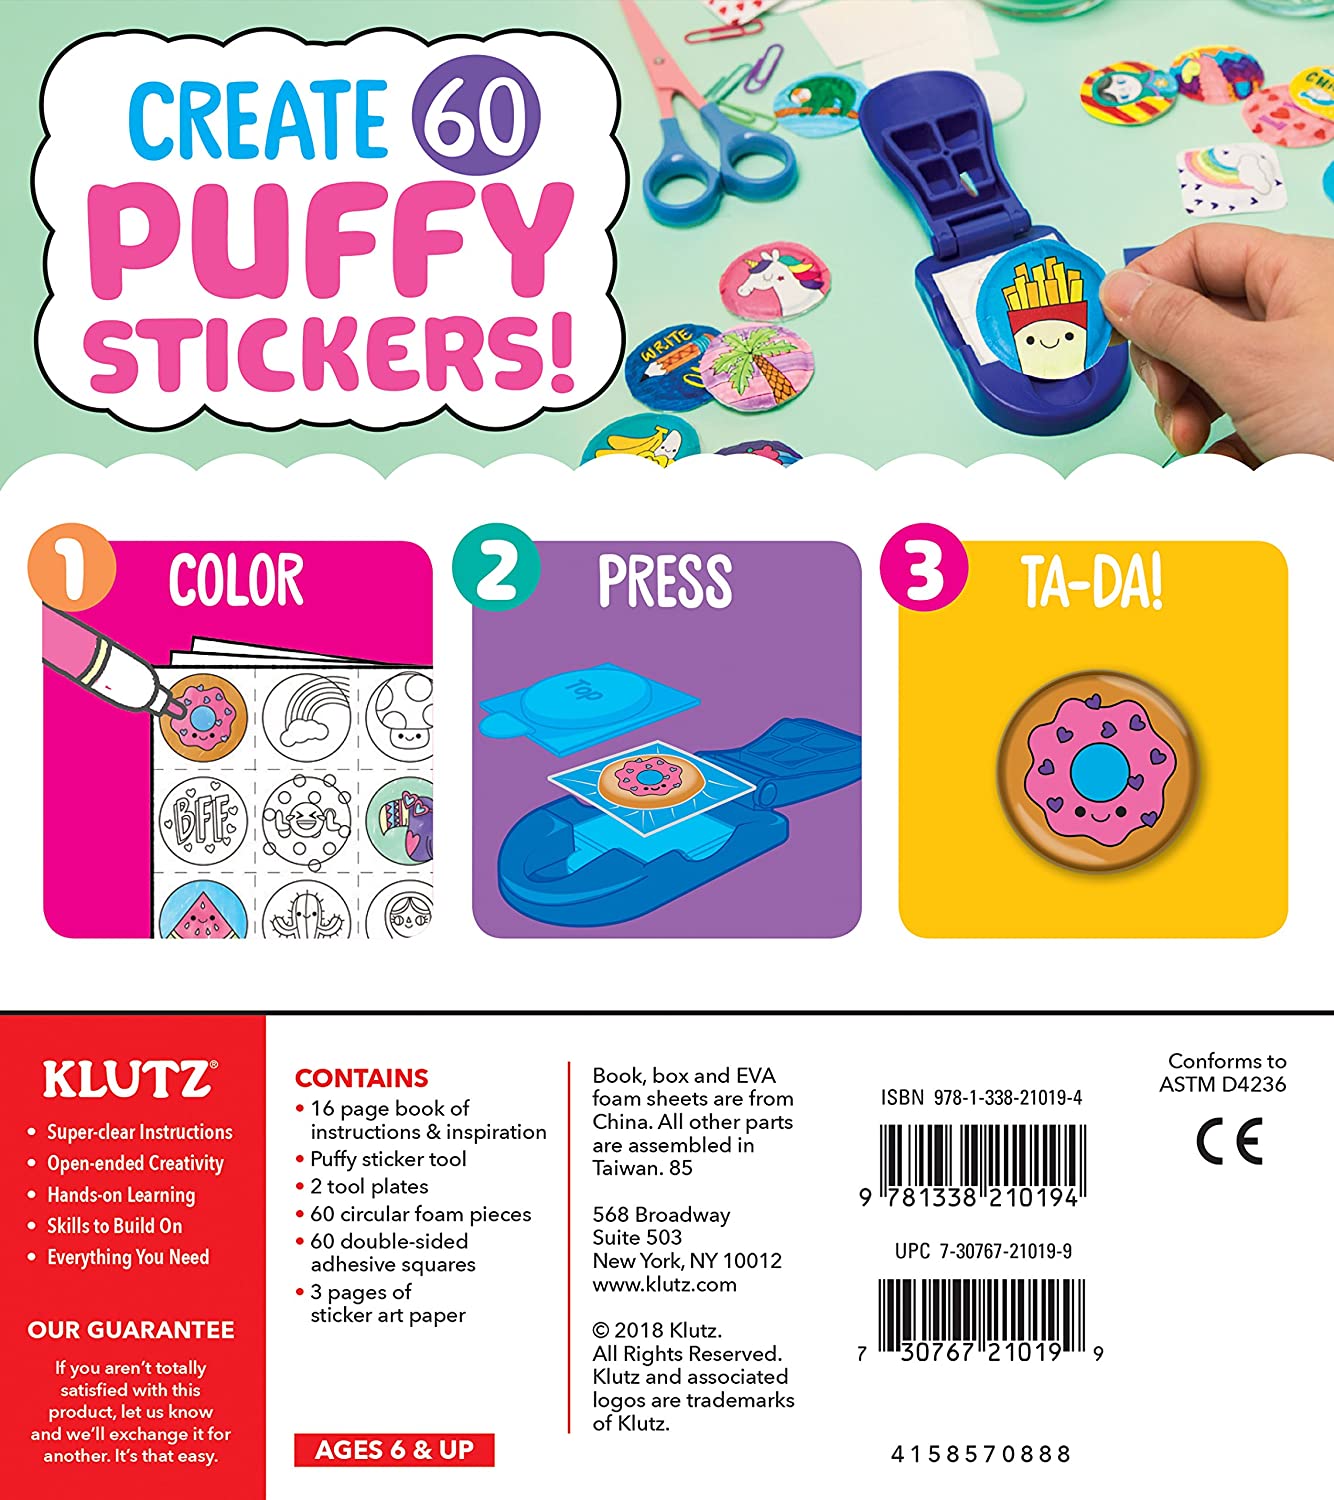 Klutz Paint & Peel Jelly Stickers - Best Arts & Crafts for Ages 6 to 7